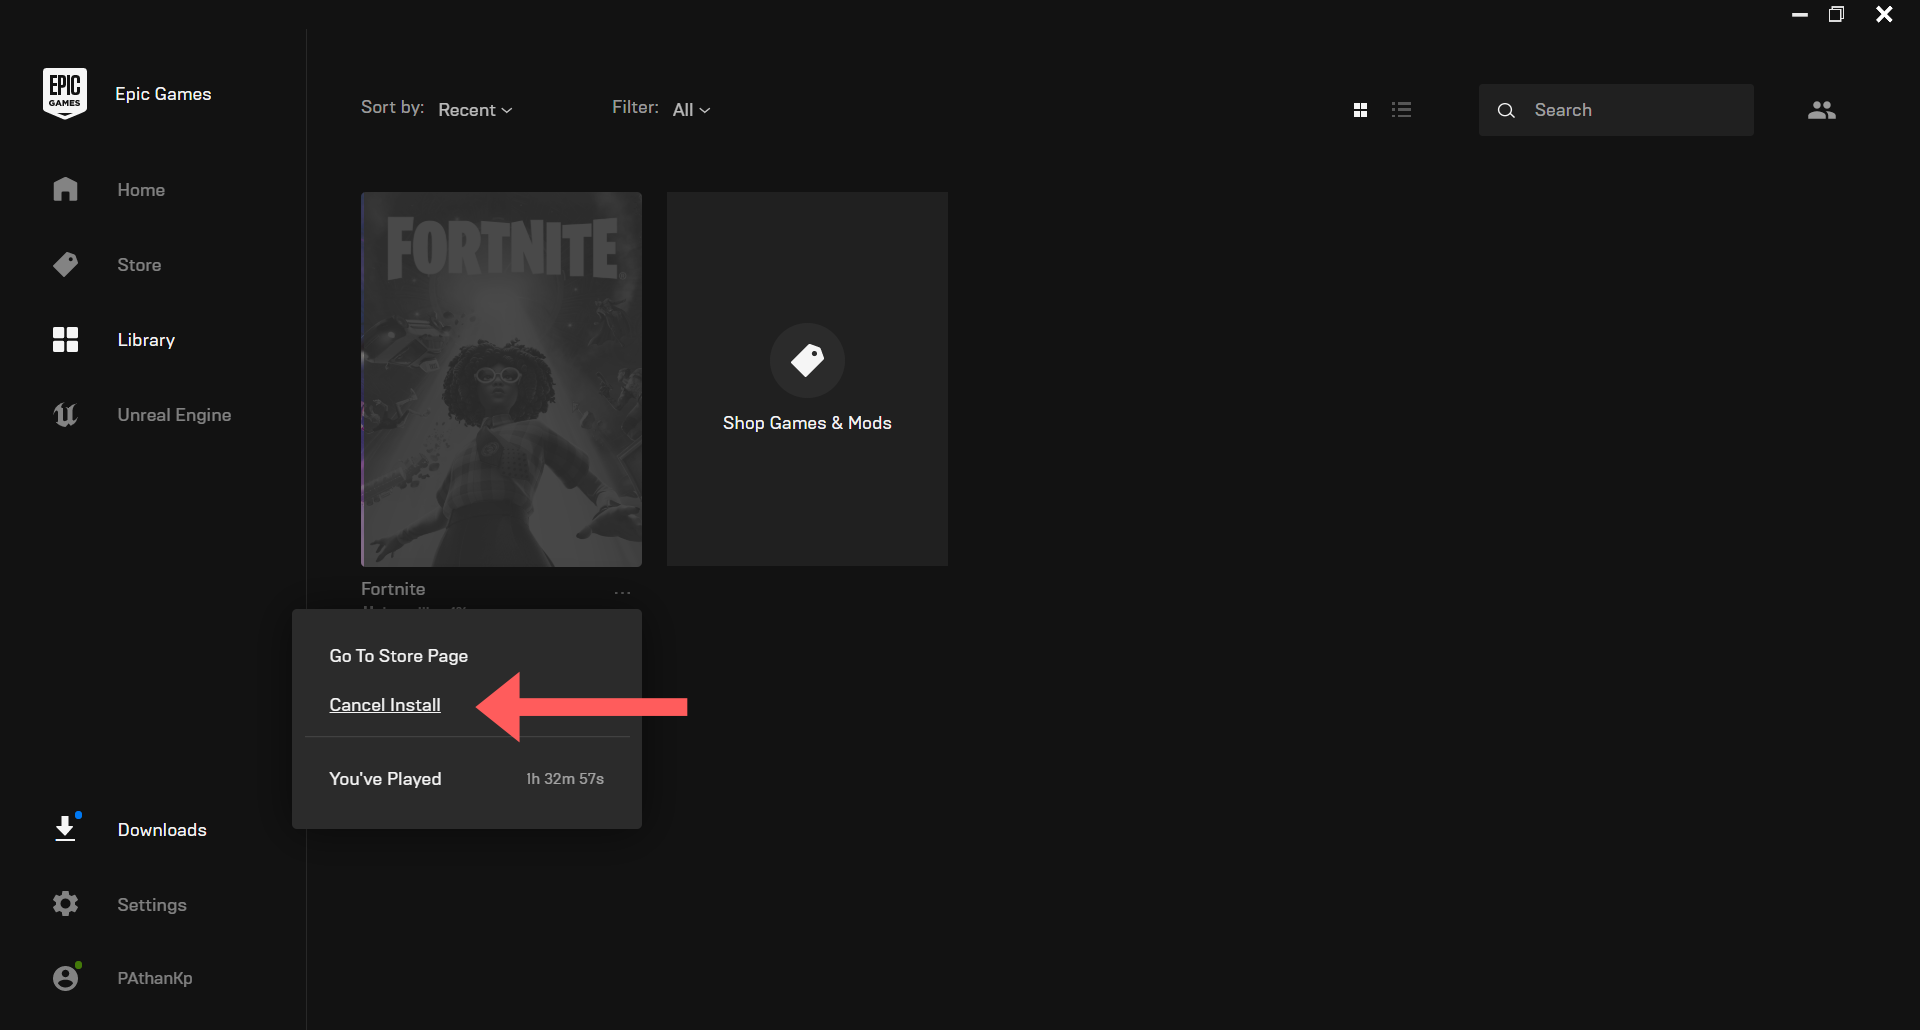 Select Cancel Install under Fortnite